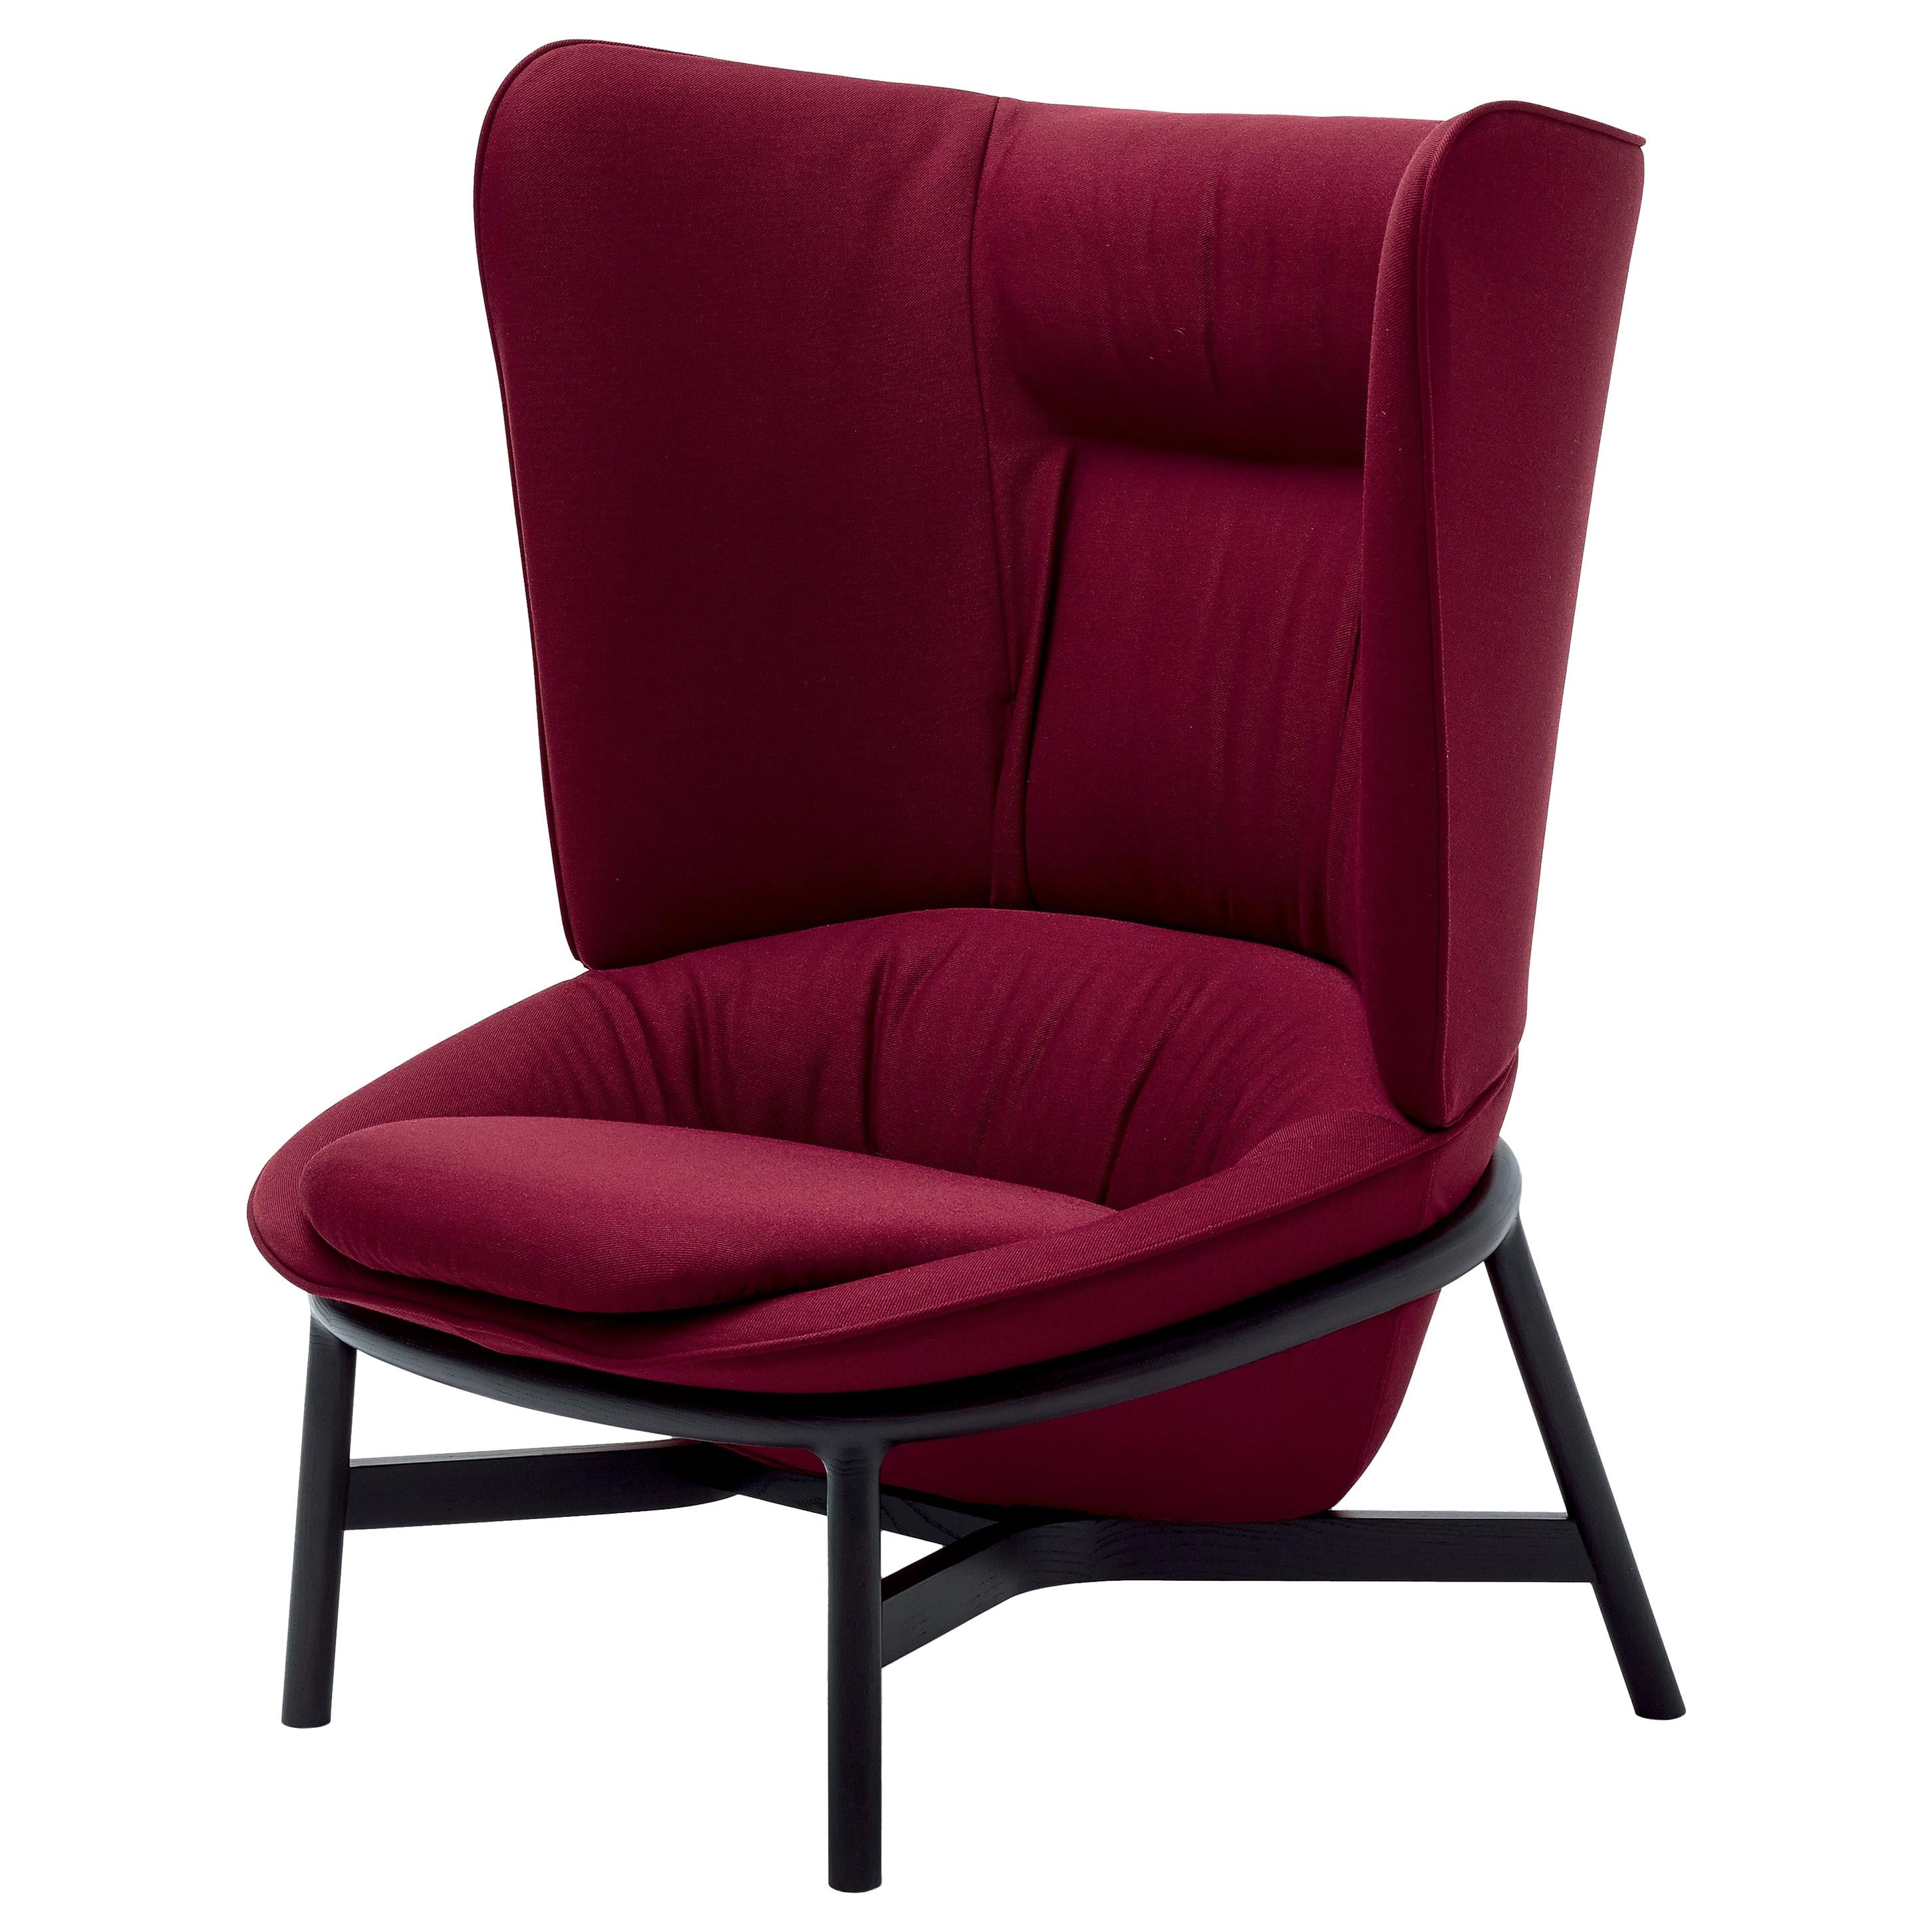 Arflex Ladle Armchair with High Backrest in Red Etoile Fabric by Luca Nichetto For Sale